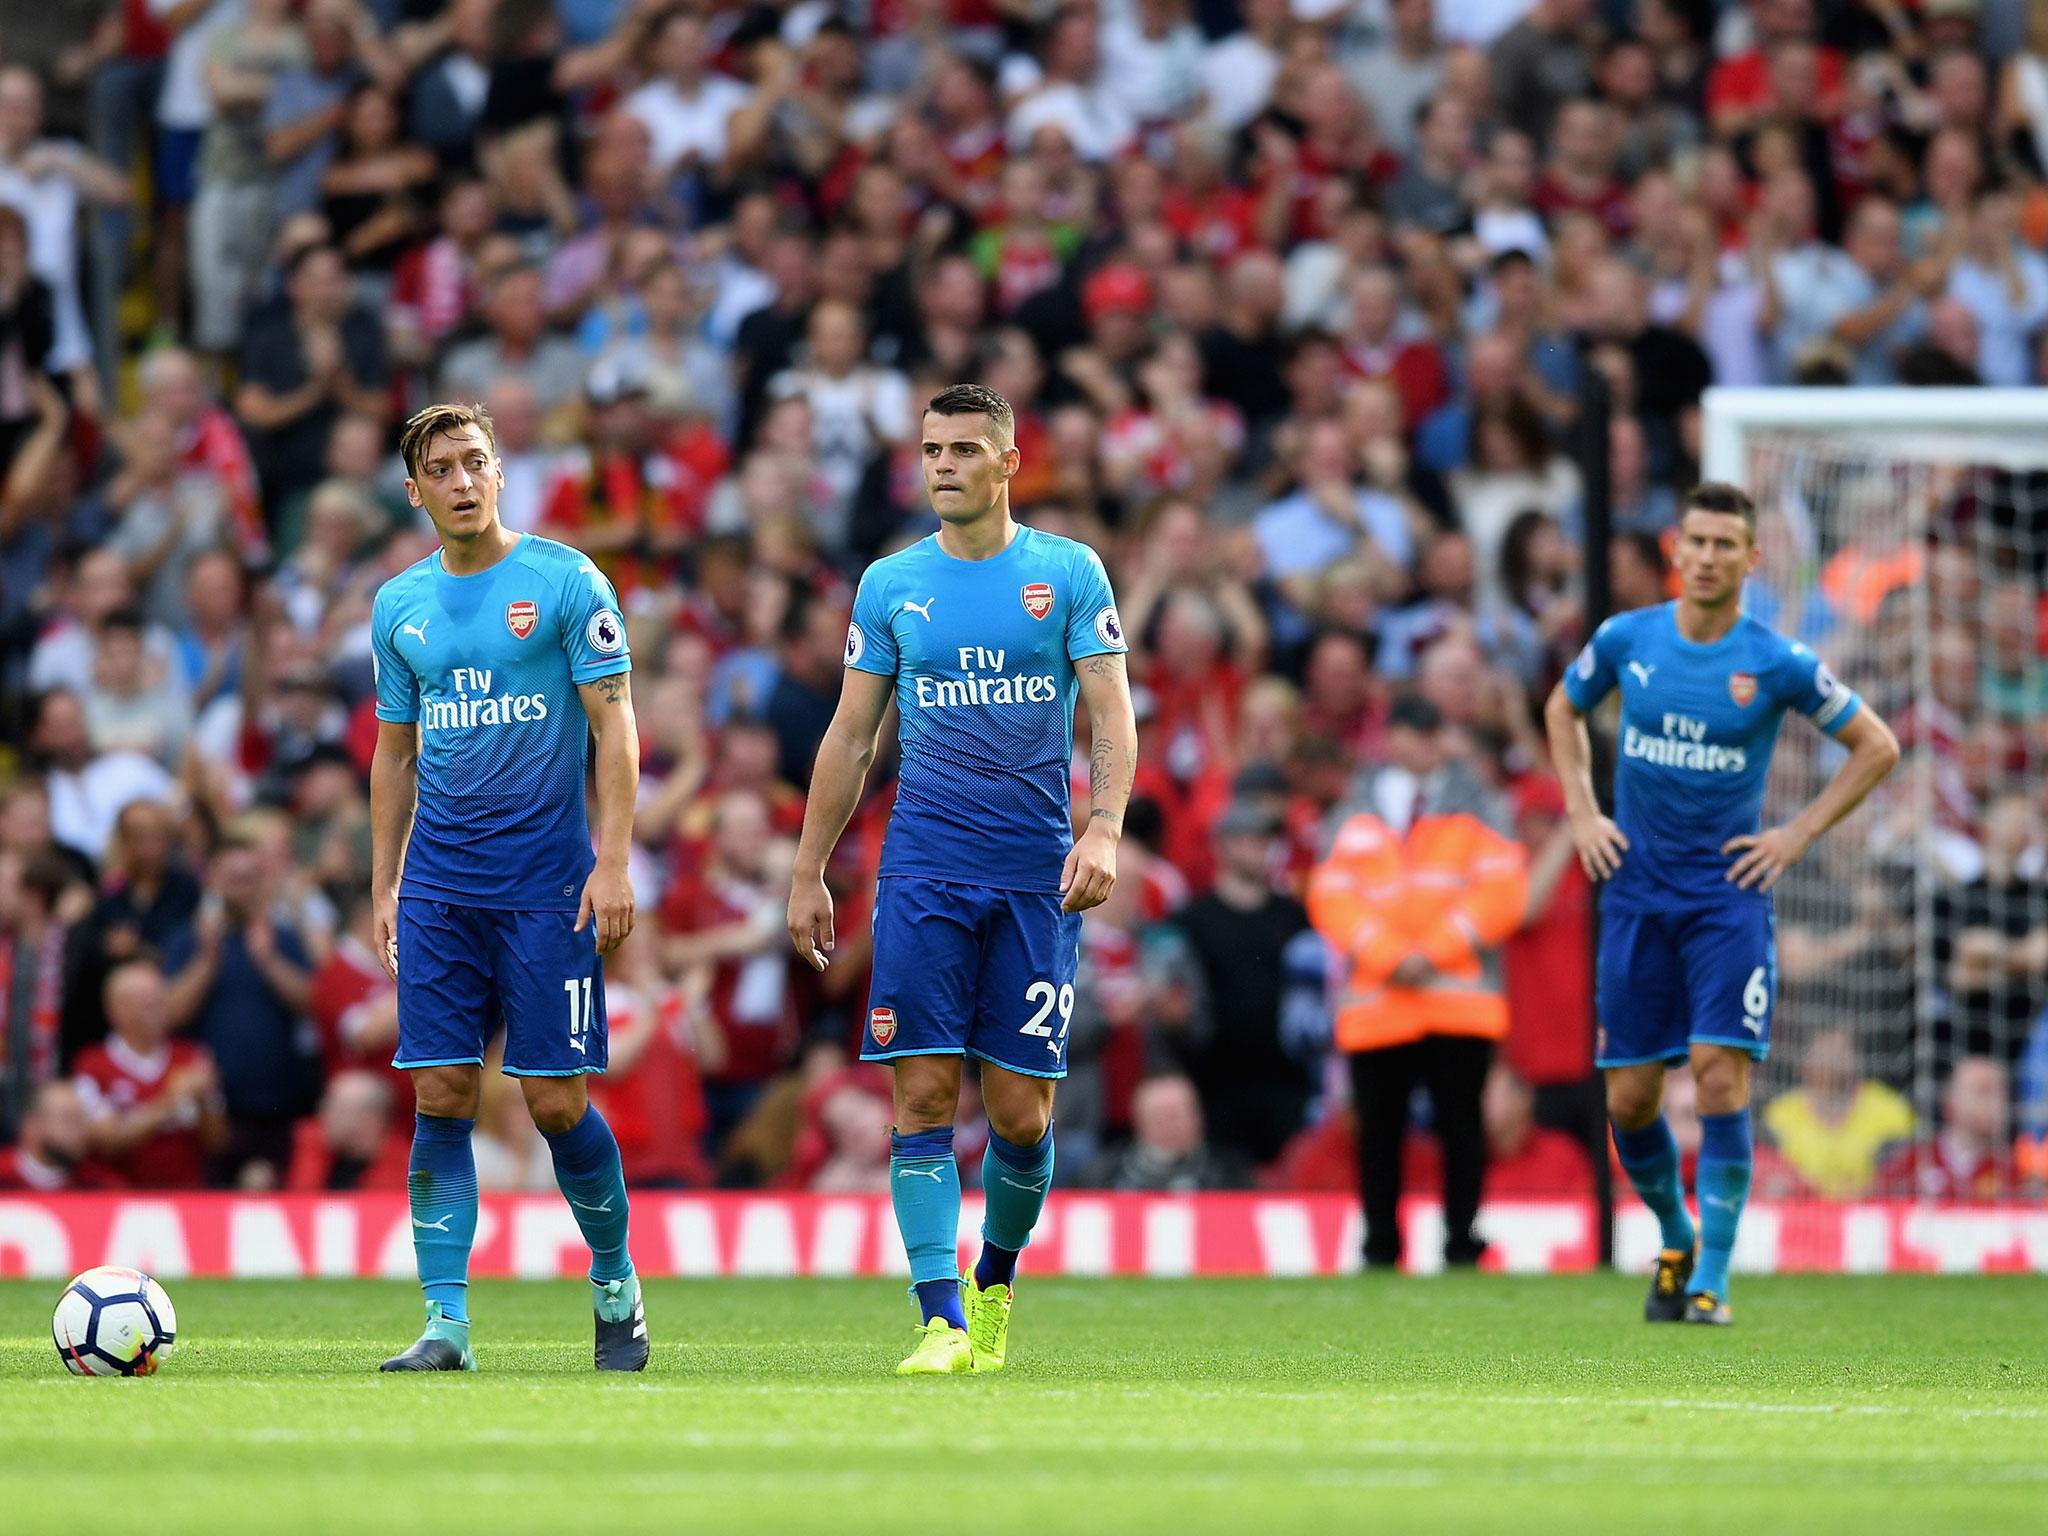 Arsenal were embarrassed by their top-six rivals